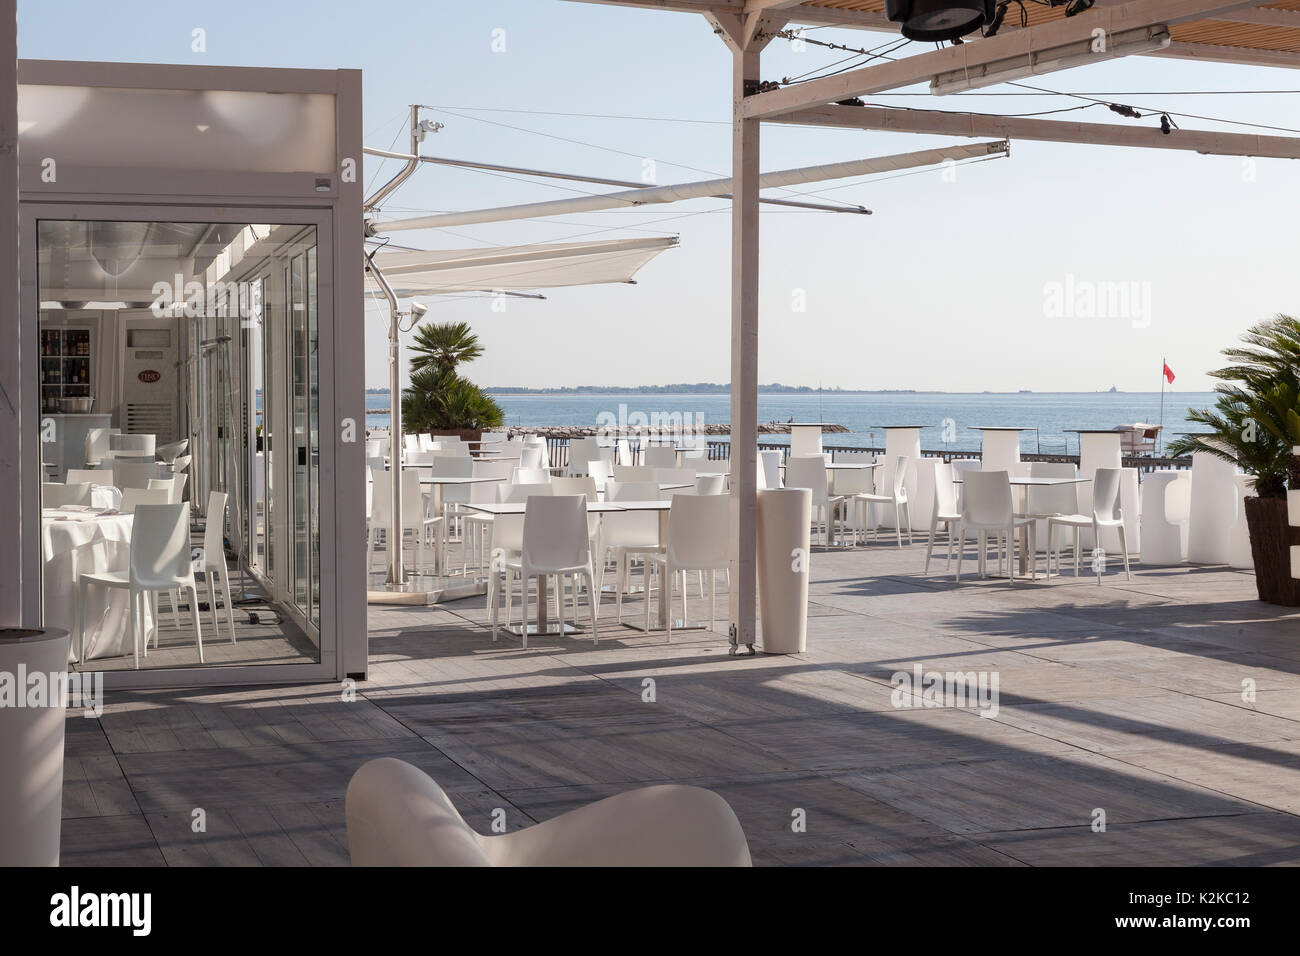 Lido, Venice, Italy. 30th Aug, 2017. Venues for the 2017 Film Festival after last minute preparations and installations and before the crowds arrive for the opening of the festival. The indoor and outdoor restaurants and seating of the official Biennale pavillion overlooking the Adriatic Sea. Stock Photo